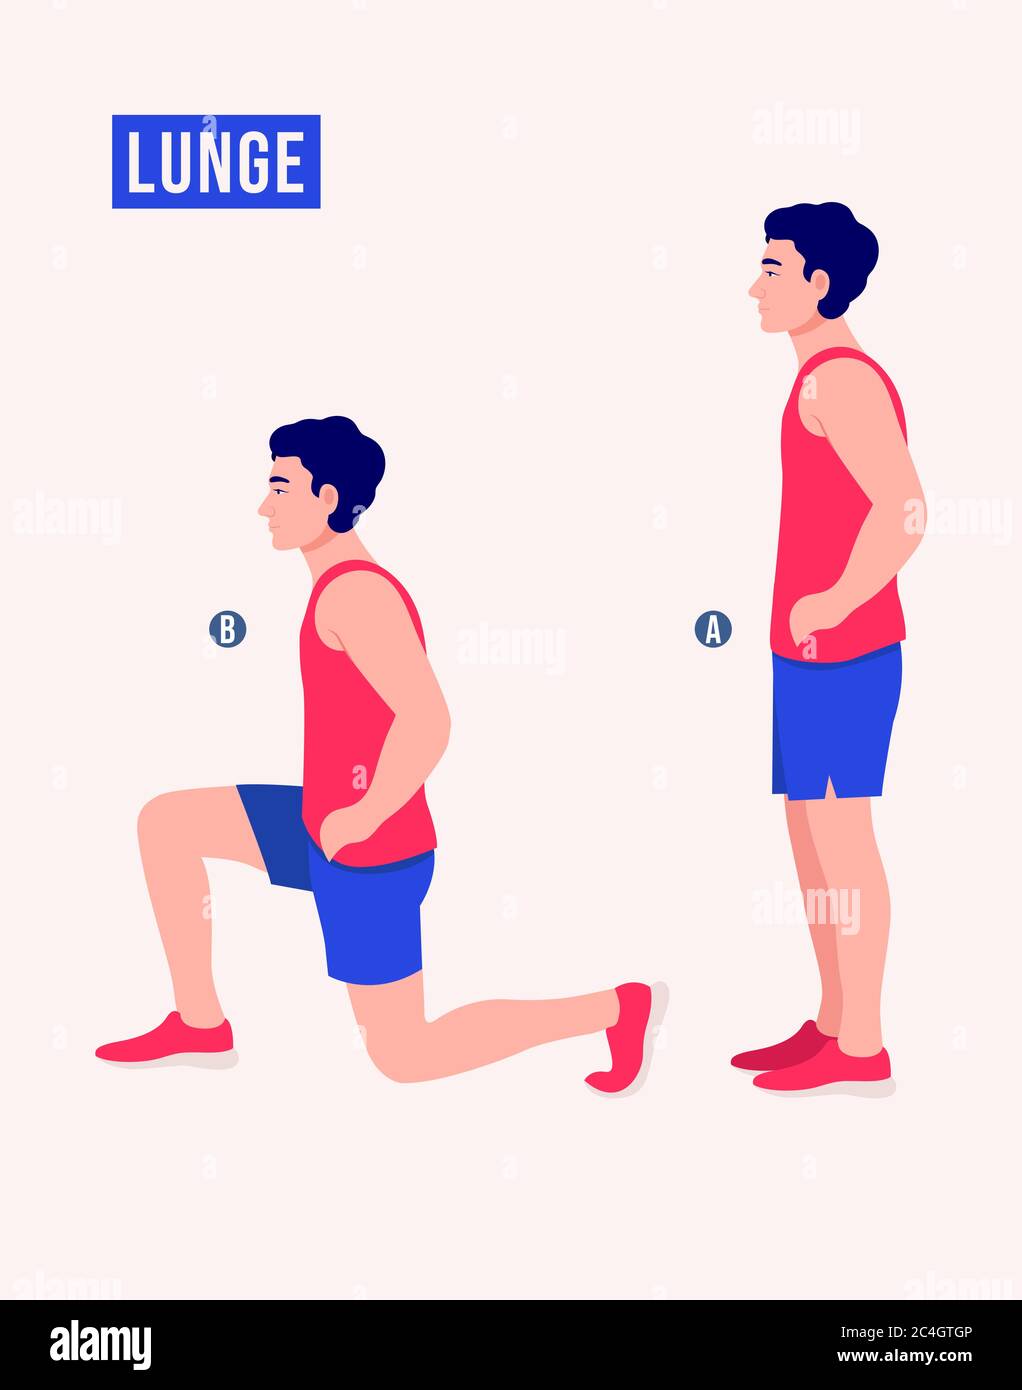 Lunges Exercise For Men